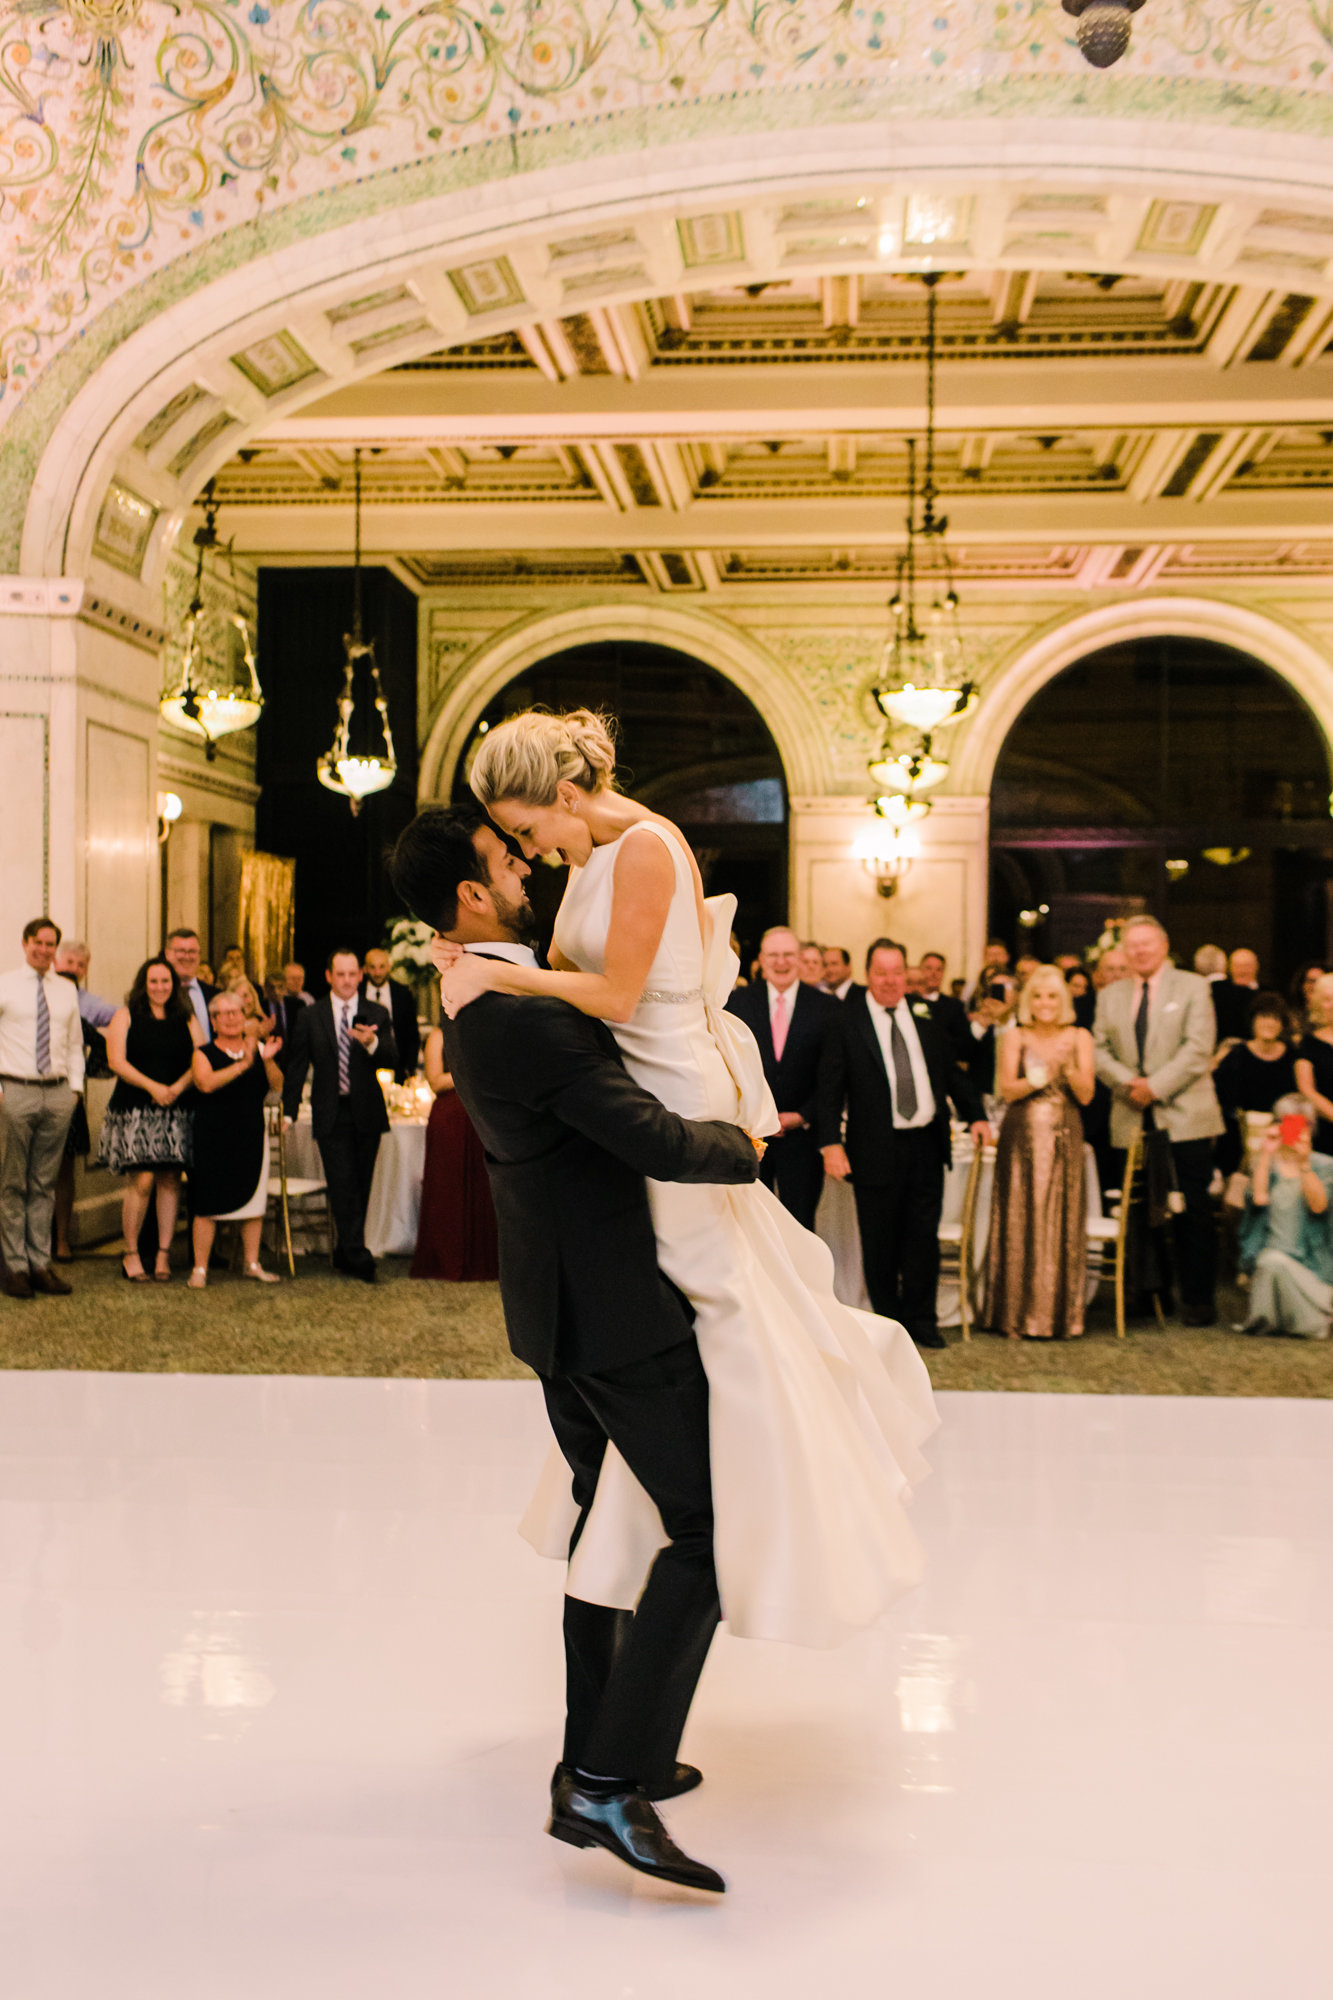 Bride and groom share their first dance inside the iconic Chicago Cultural Center